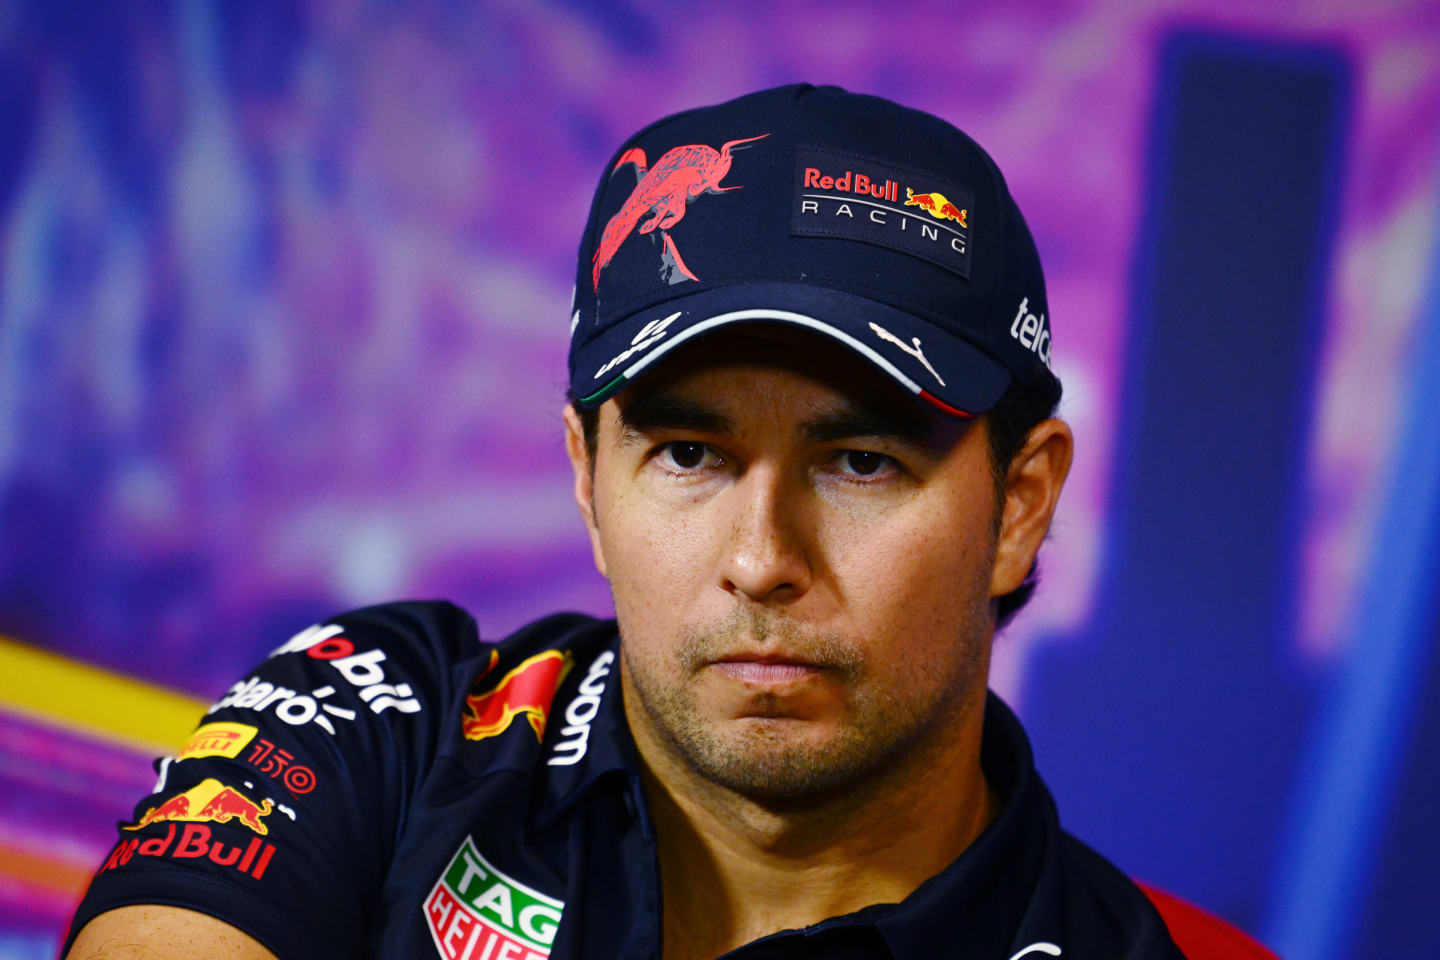 SINGAPORE, SINGAPORE - SEPTEMBER 29: Sergio Perez of Mexico and Oracle Red Bull Racing attends the Drivers Press Conference during previews ahead of the F1 Grand Prix of Singapore at Marina Bay Street Circuit on September 29, 2022 in Singapore, Singapore. (Photo by Clive Mason/Getty Images,)